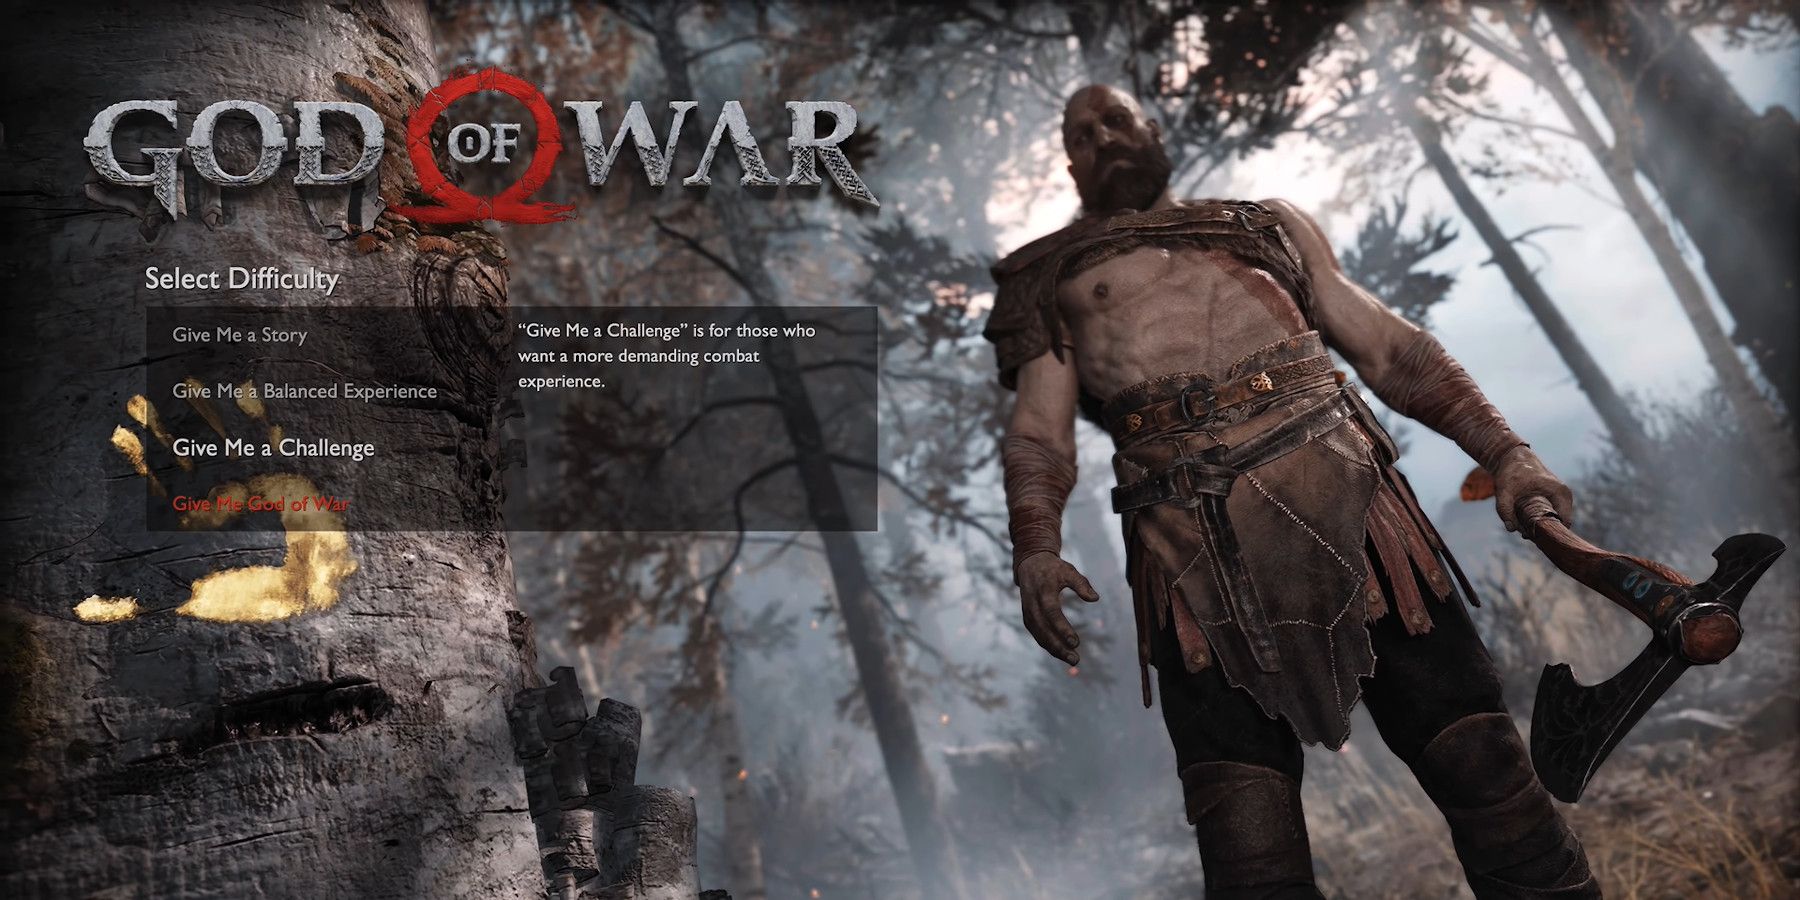 Is God of War a hard game?